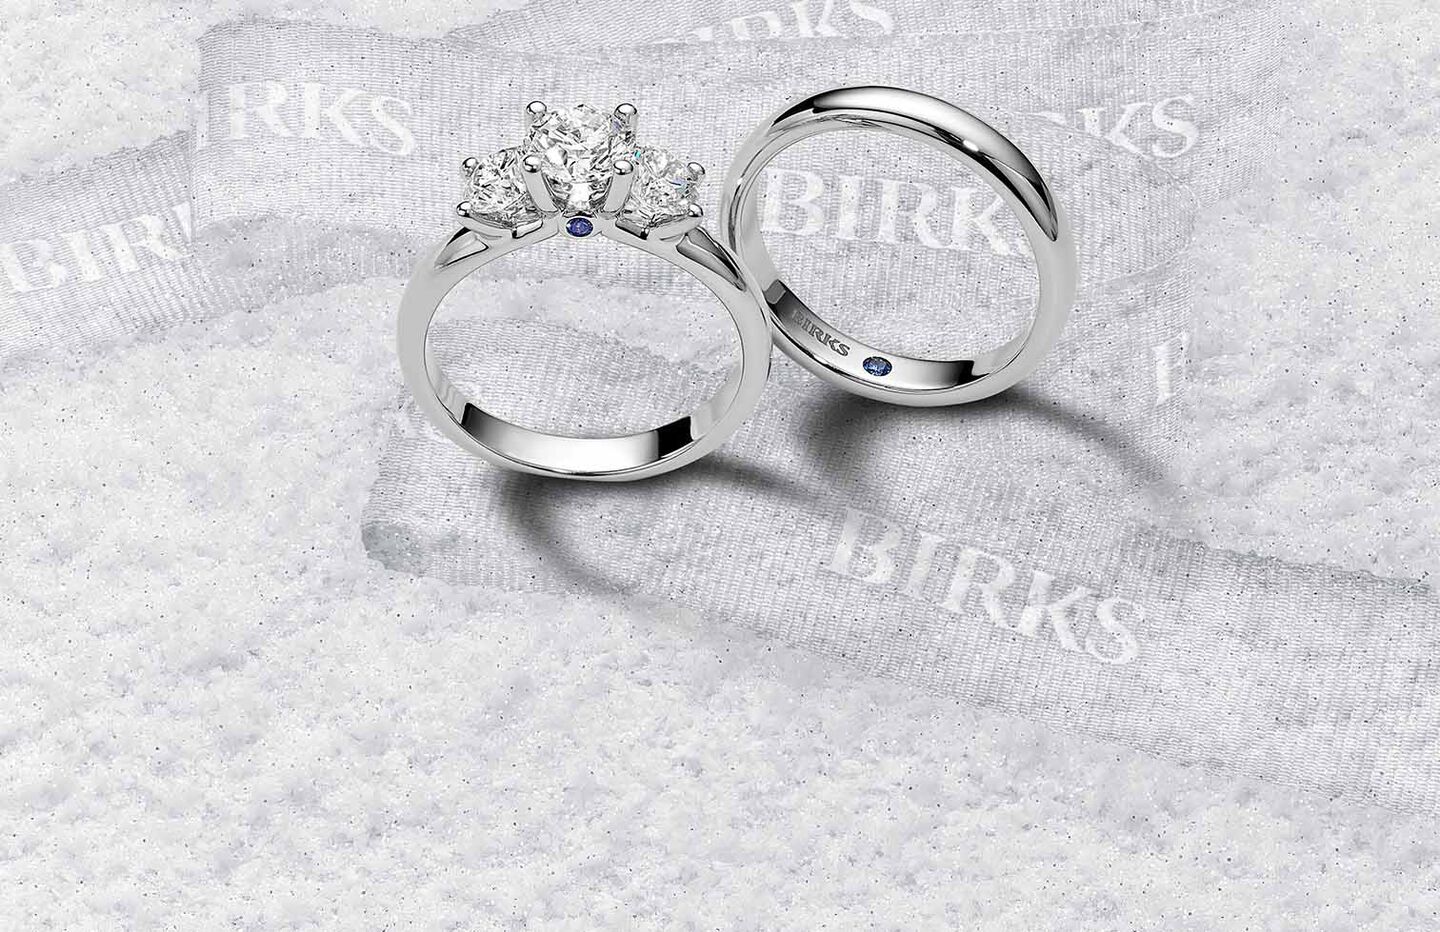 Birks Blue diamond engagement ring and wedding band with sapphire accents on a snowy background